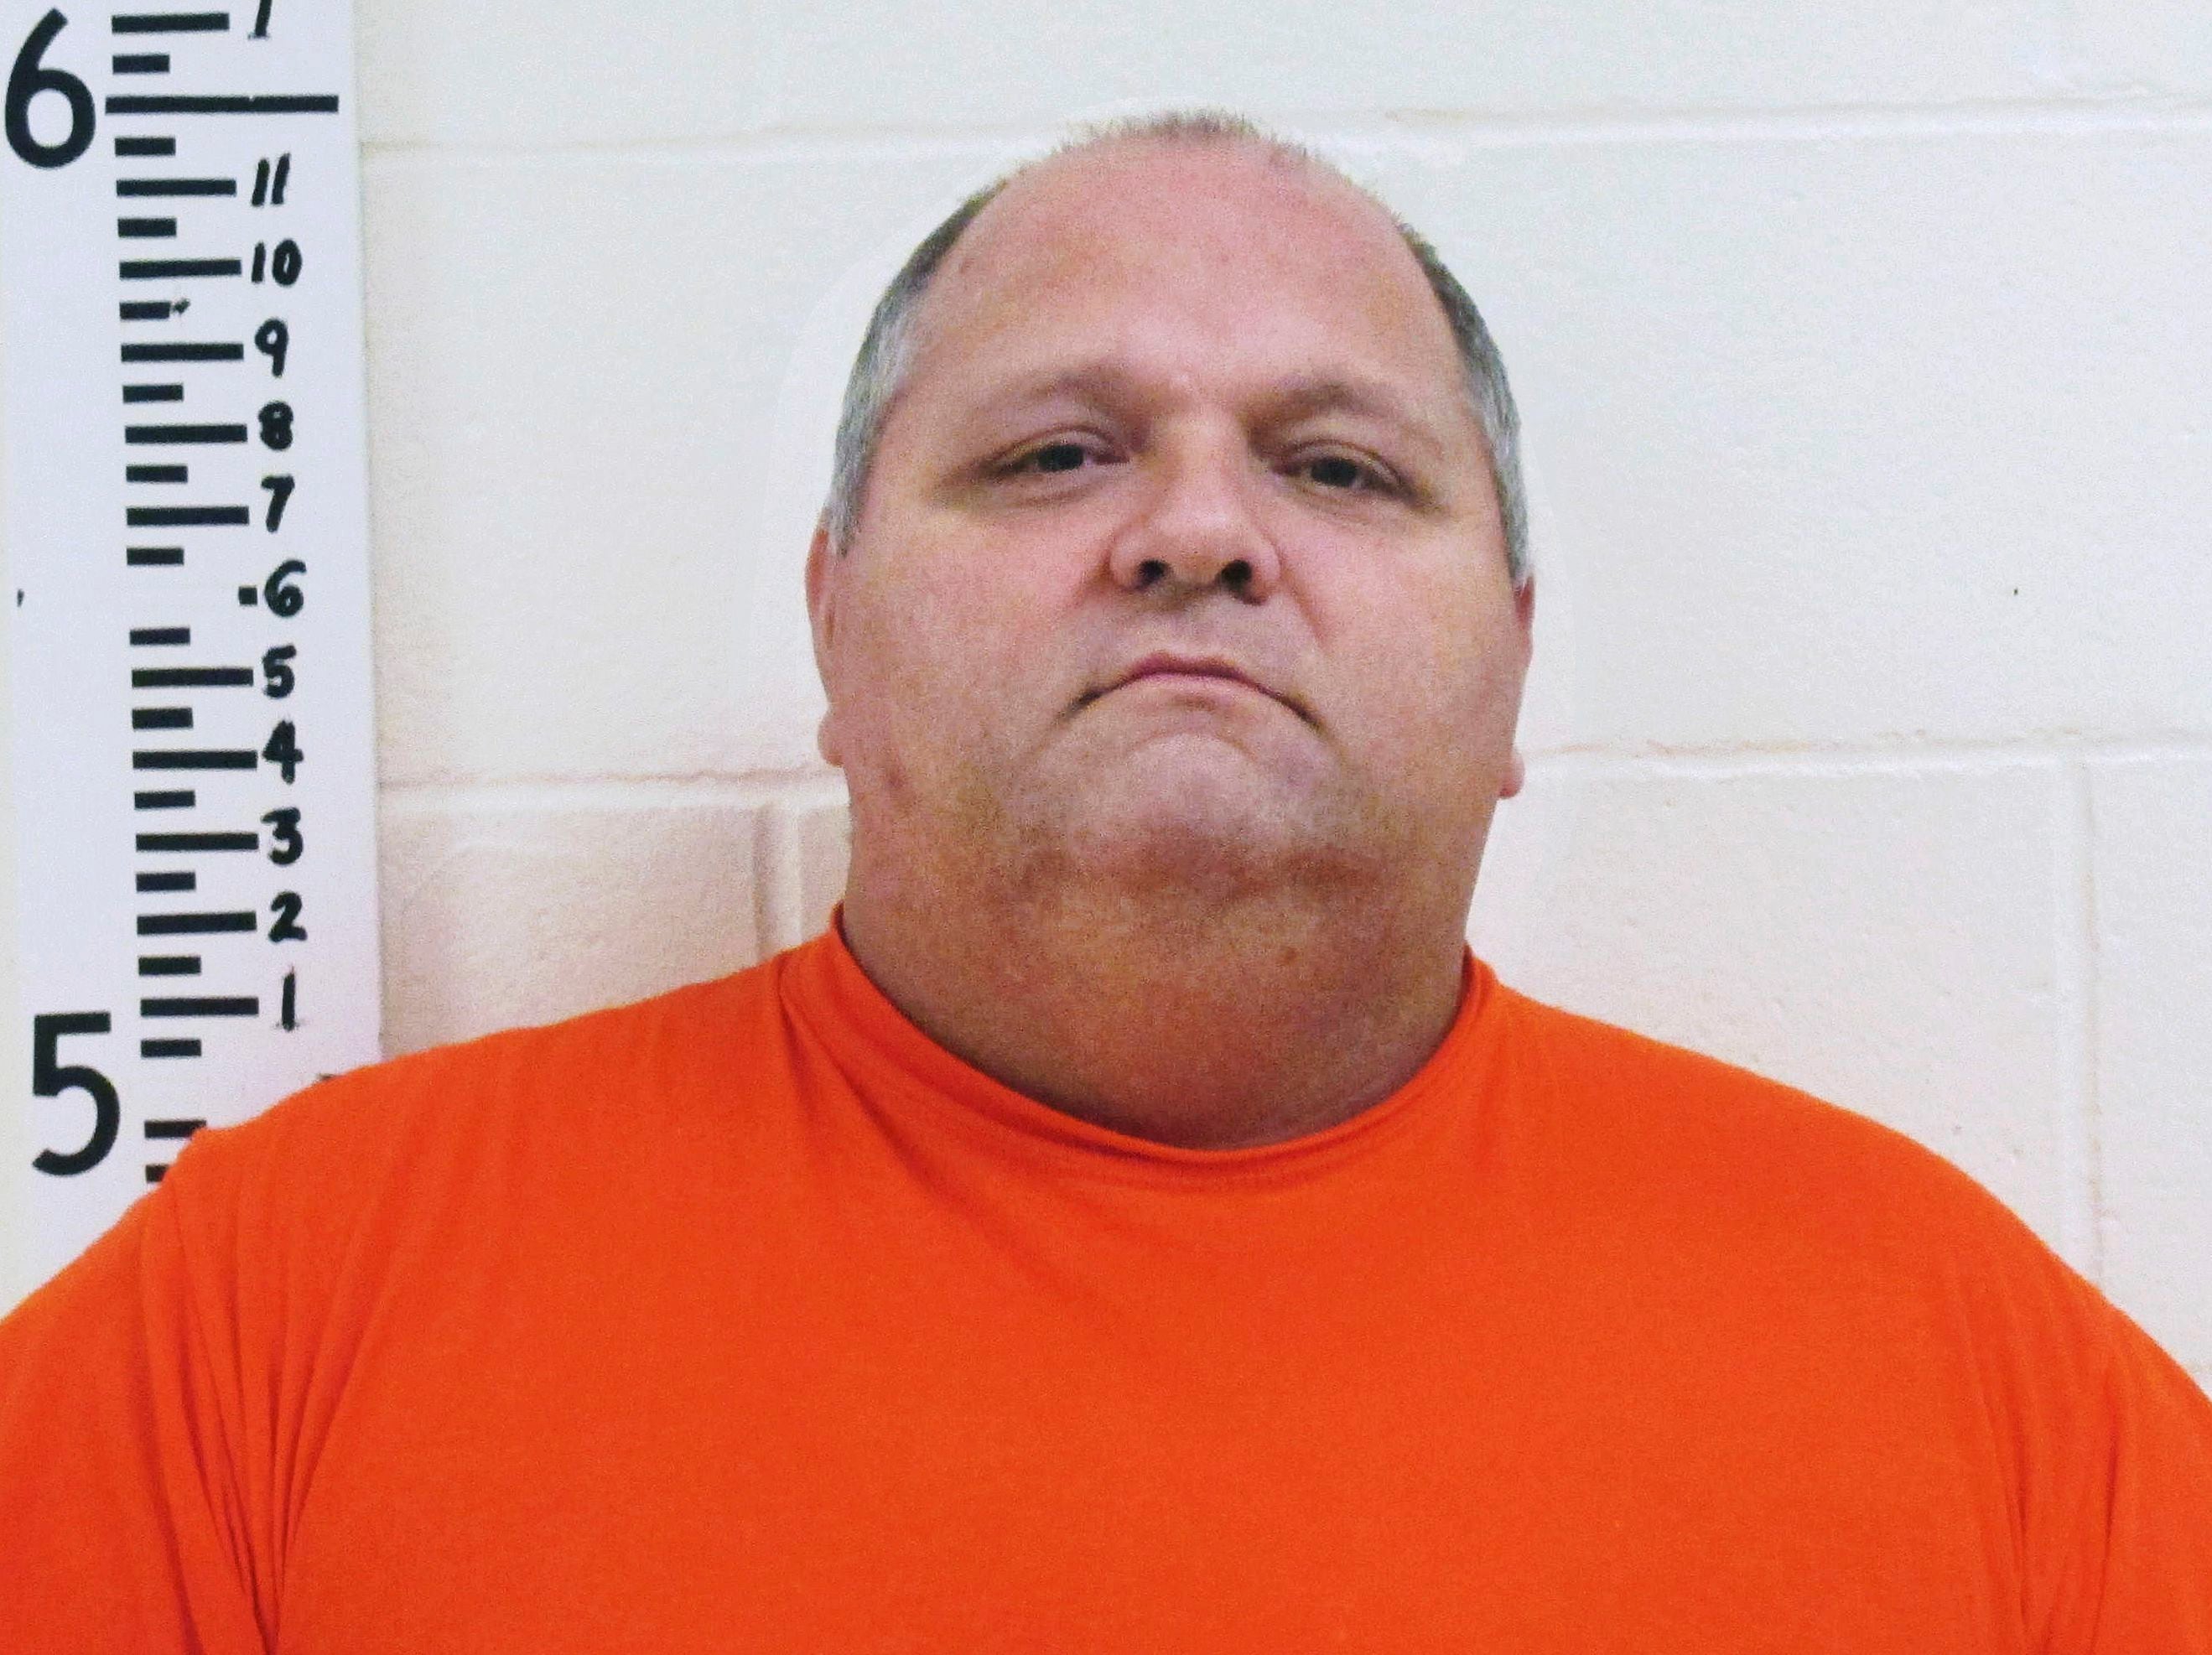 This undated booking photo released by the York County Sheriff's Department shows Michael Middleton, accused of marrying women in multiple states including New Hampshire. Middleton, whose last known address was in Old Orchard Beach, Maine, is due in court for a plea hearing on Monday, April 29, 2019, in Dover, N.H. (York County Sheriff's Department via AP)